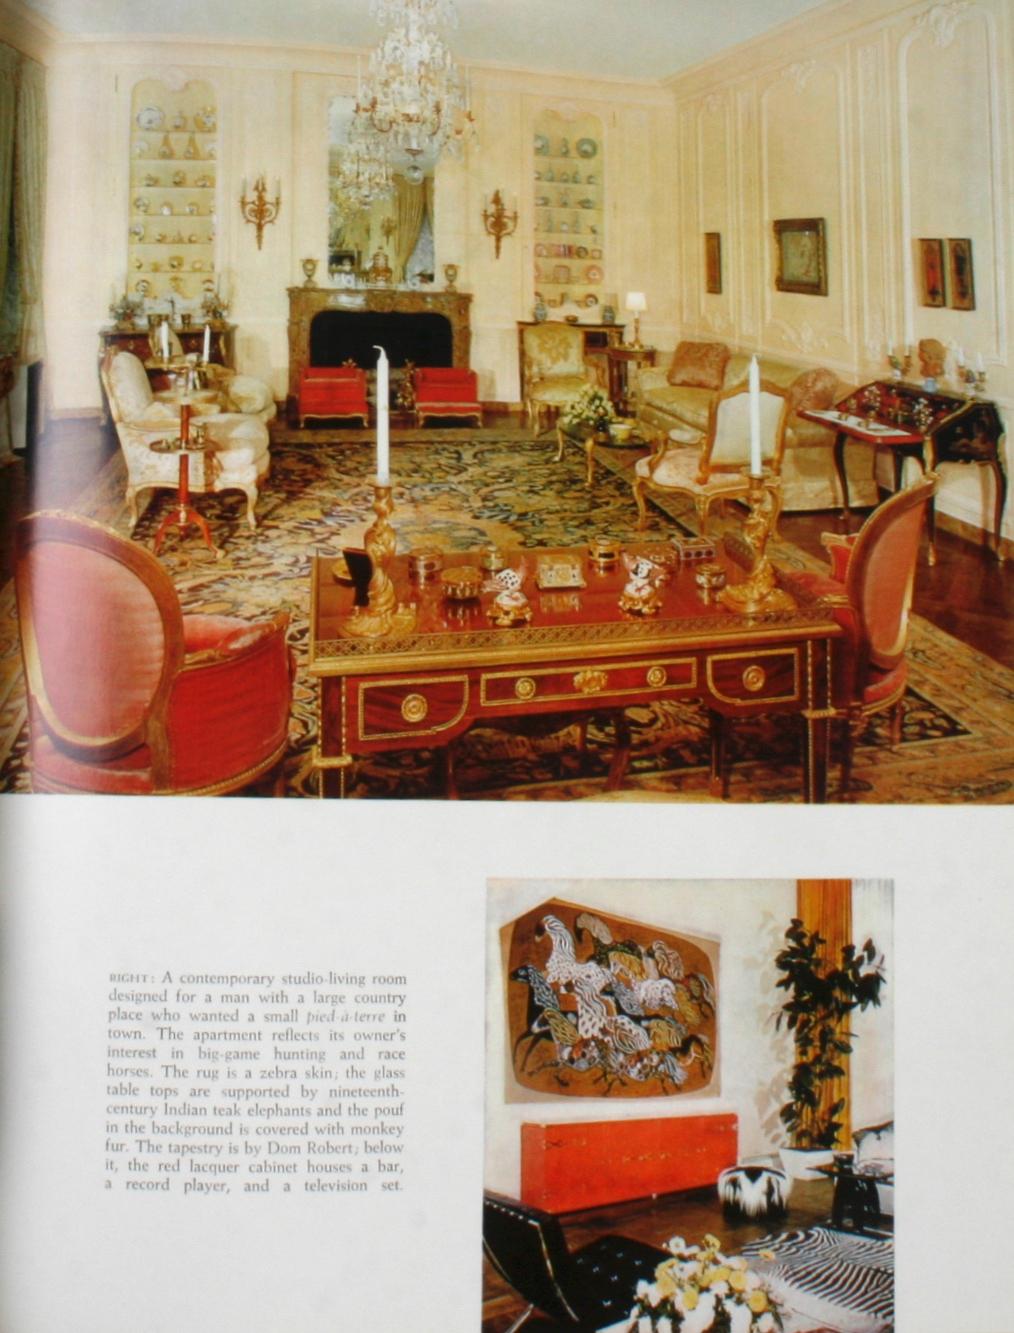 The Finest Rooms by America's Great Decorators, First Edition 4